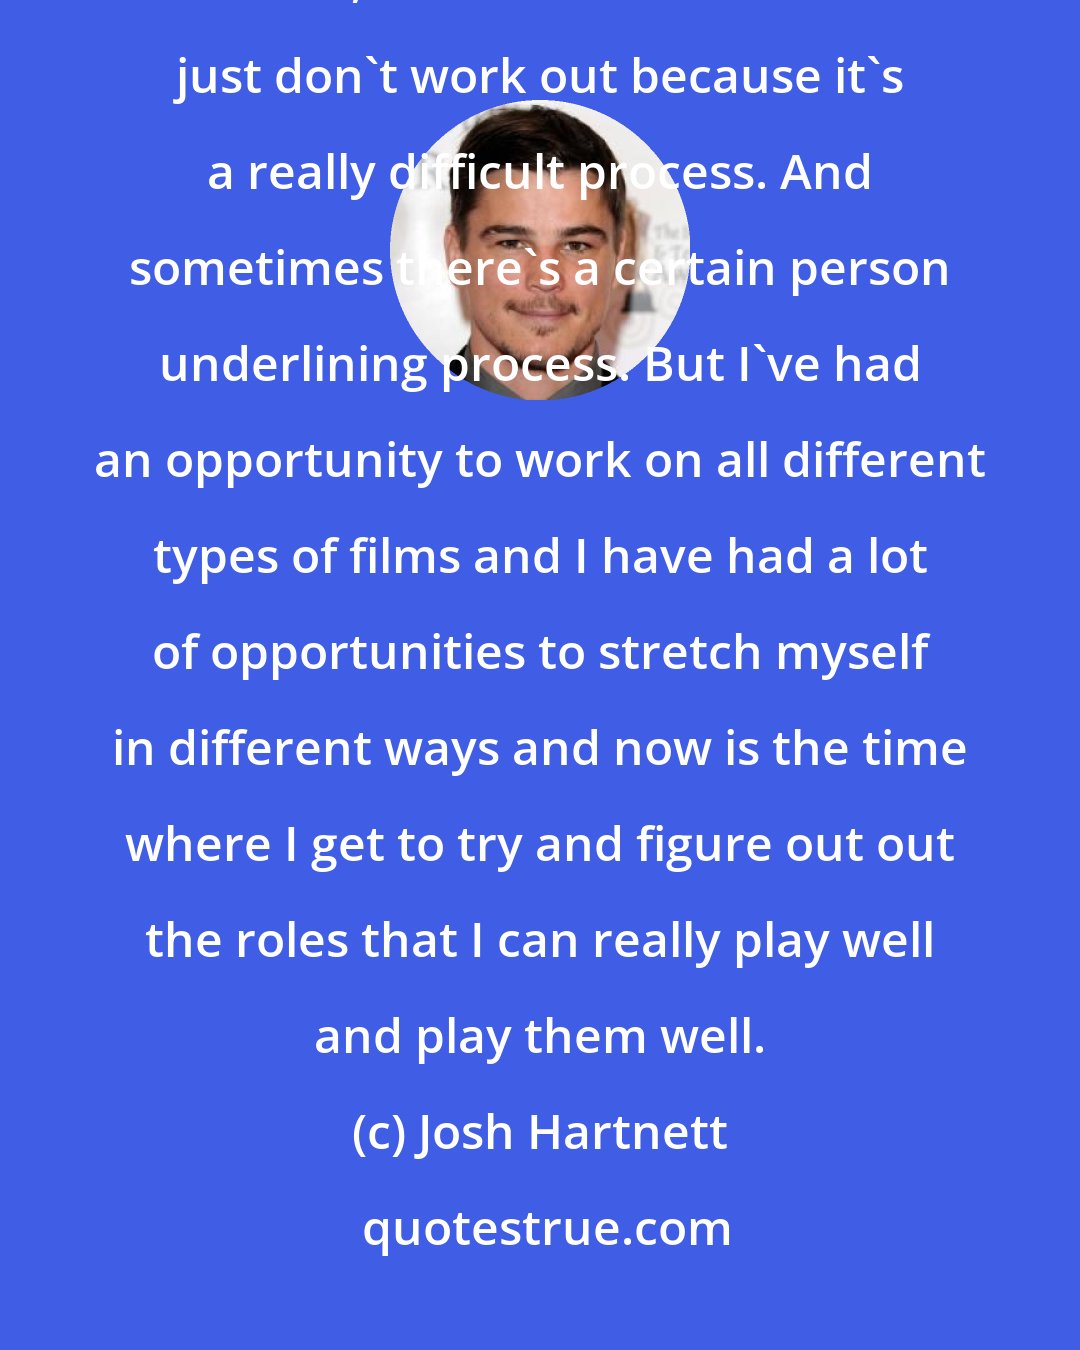 Josh Hartnett: You learn so much from making mistakes, not even necessarily mistakes that I've made, a lot of the time the films just don't work out because it's a really difficult process. And sometimes there's a certain person underlining process. But I've had an opportunity to work on all different types of films and I have had a lot of opportunities to stretch myself in different ways and now is the time where I get to try and figure out out the roles that I can really play well and play them well.